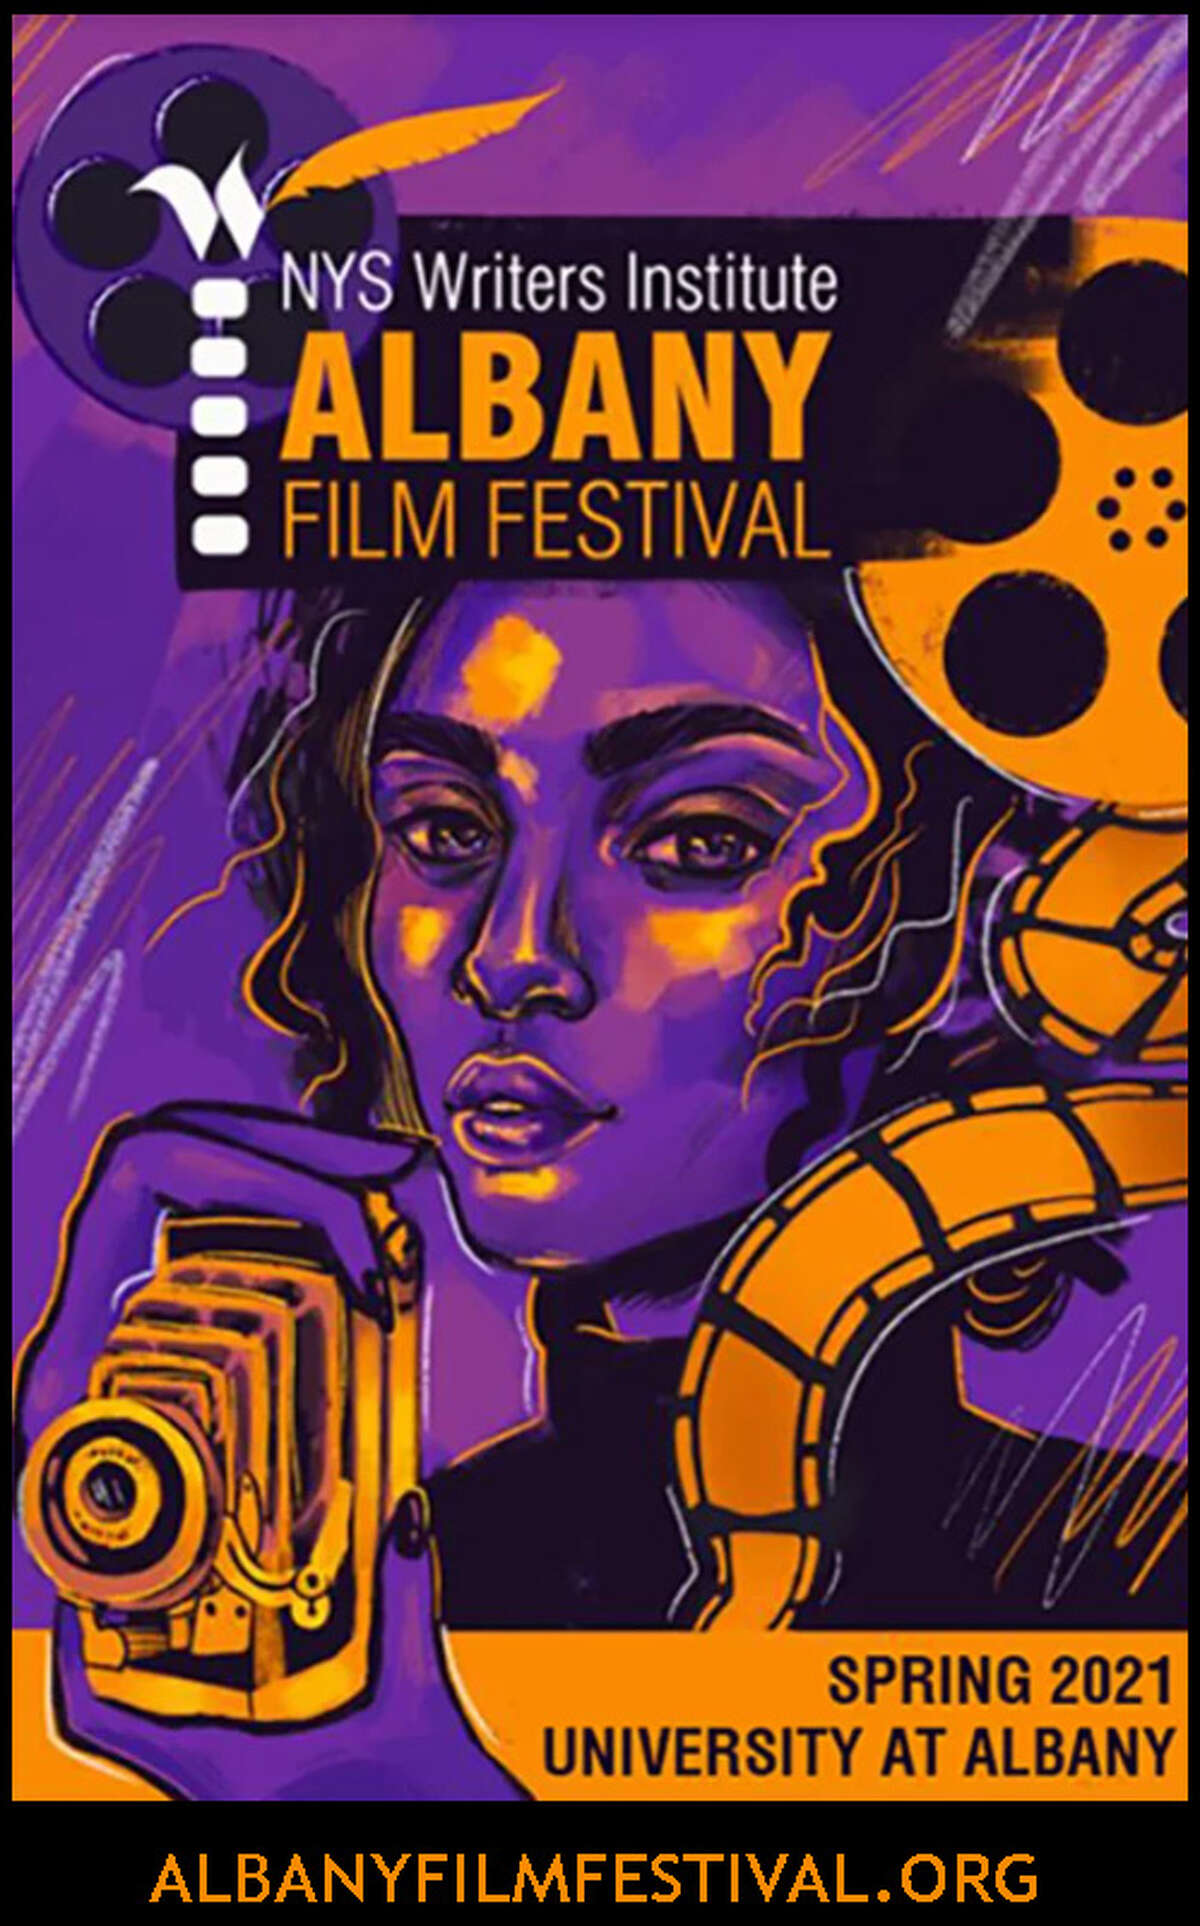 The poster for the inaugural Albany Film Festival, sponsored by the New York State Writers Institute and being held in person and online from April 24 through May 3. (Provided photo.)